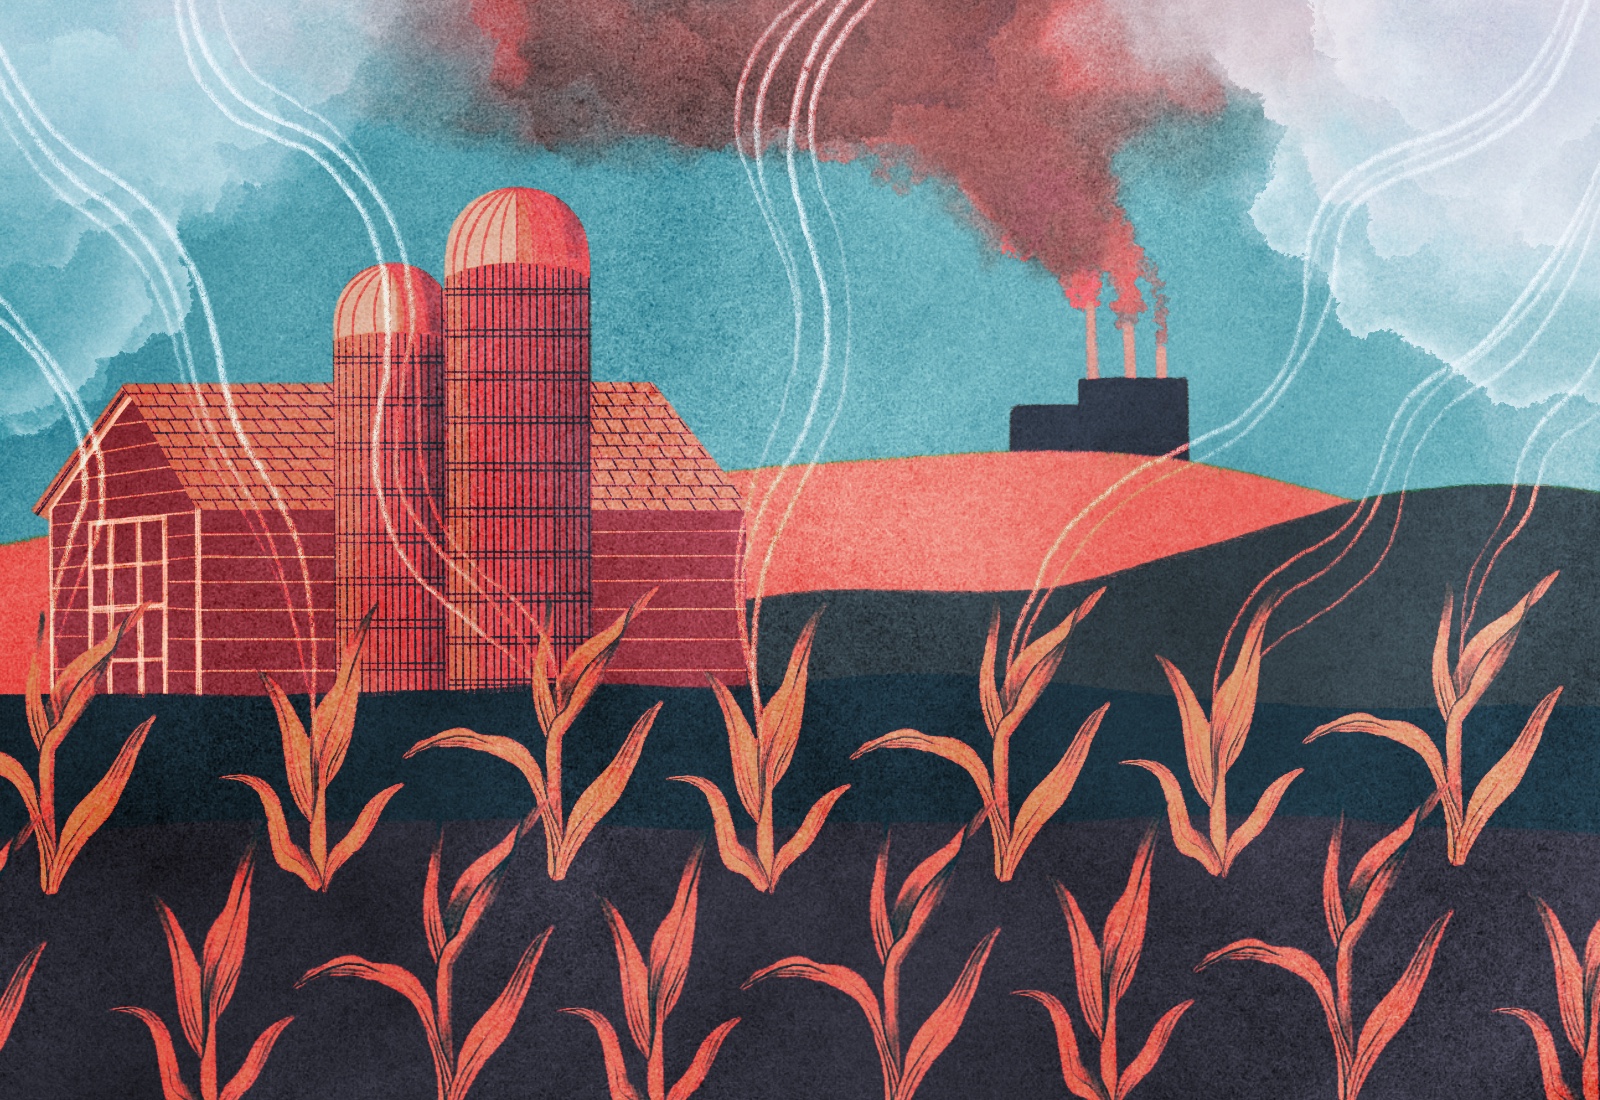 Illustration: farmland with a barn and silos, corn, and a coal factory in the distance